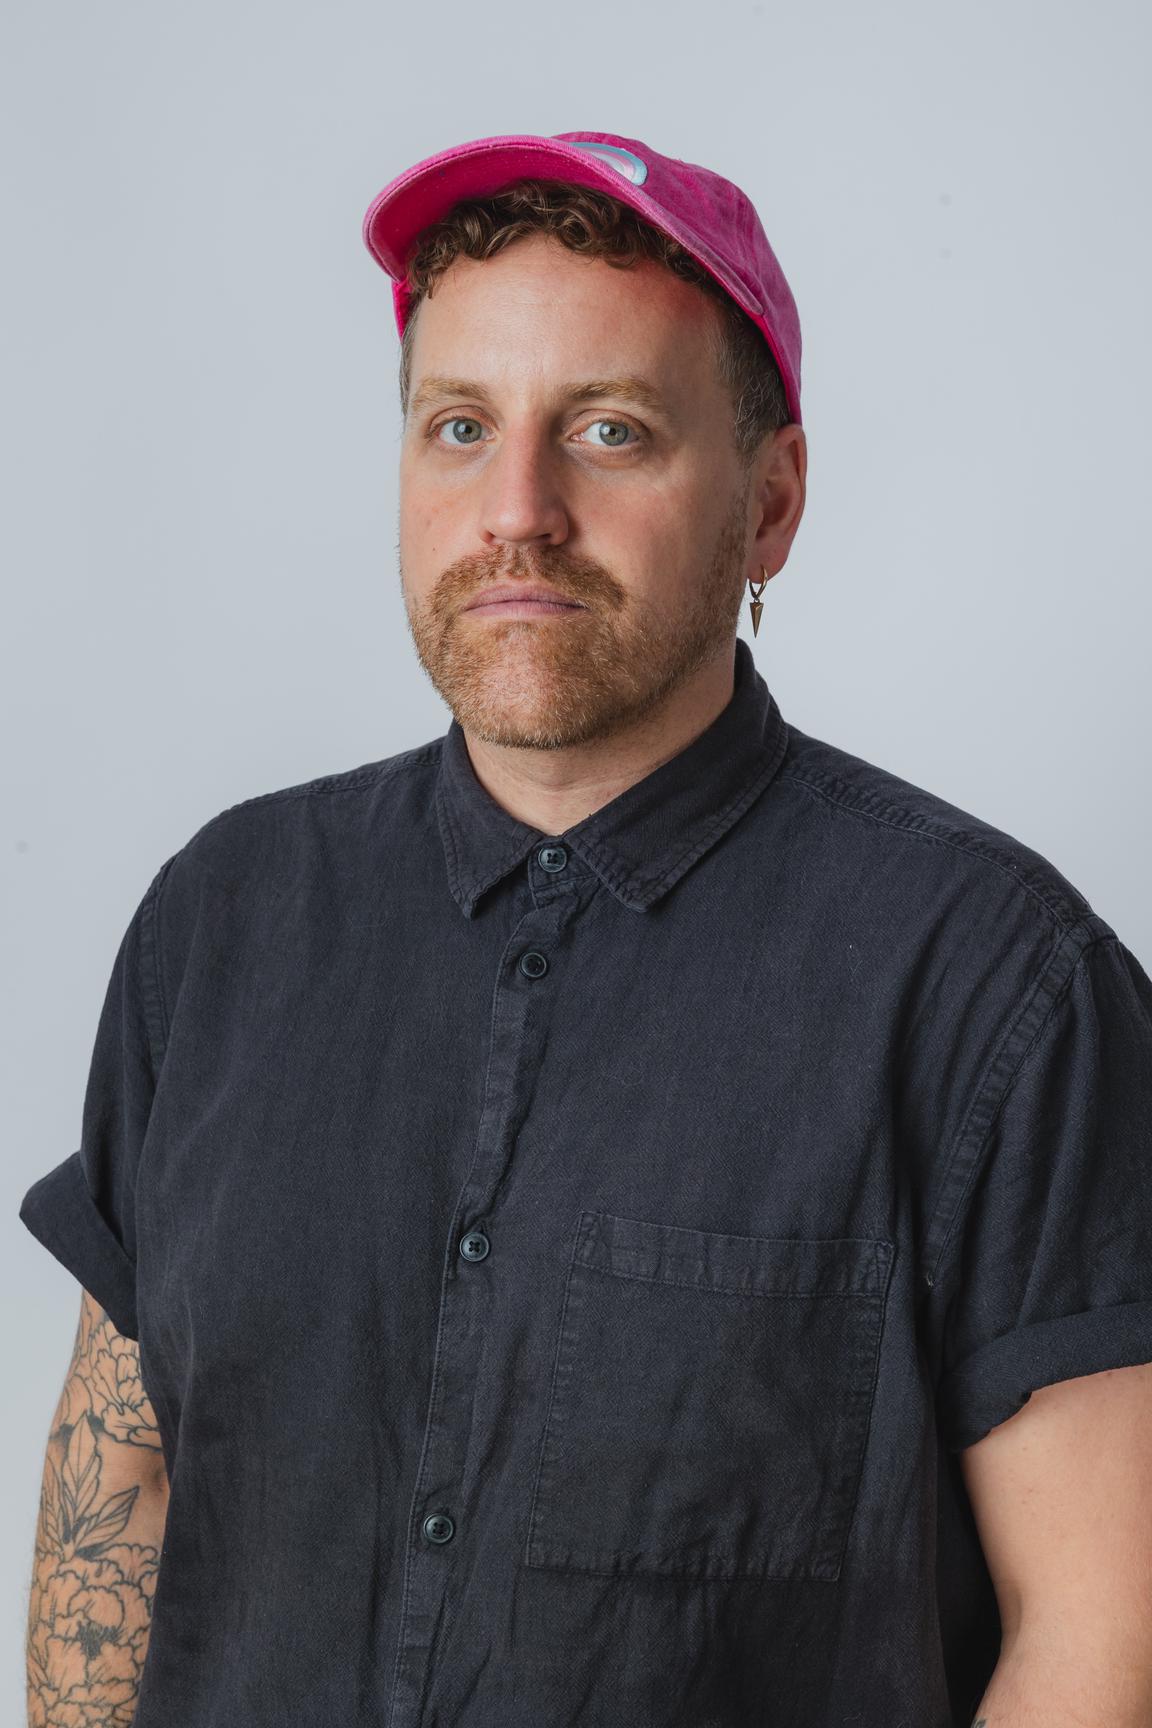 A picture of Stewart Legere. He is slightly angled, looking at the camera. He is wearing a dark blue short-sleeved button up shirt. He is wearing a pink ballcap with a Trans flag on the front. He has short, reddish stubble, and a neutral expression that indicates he doesn't love having his picture taken. 